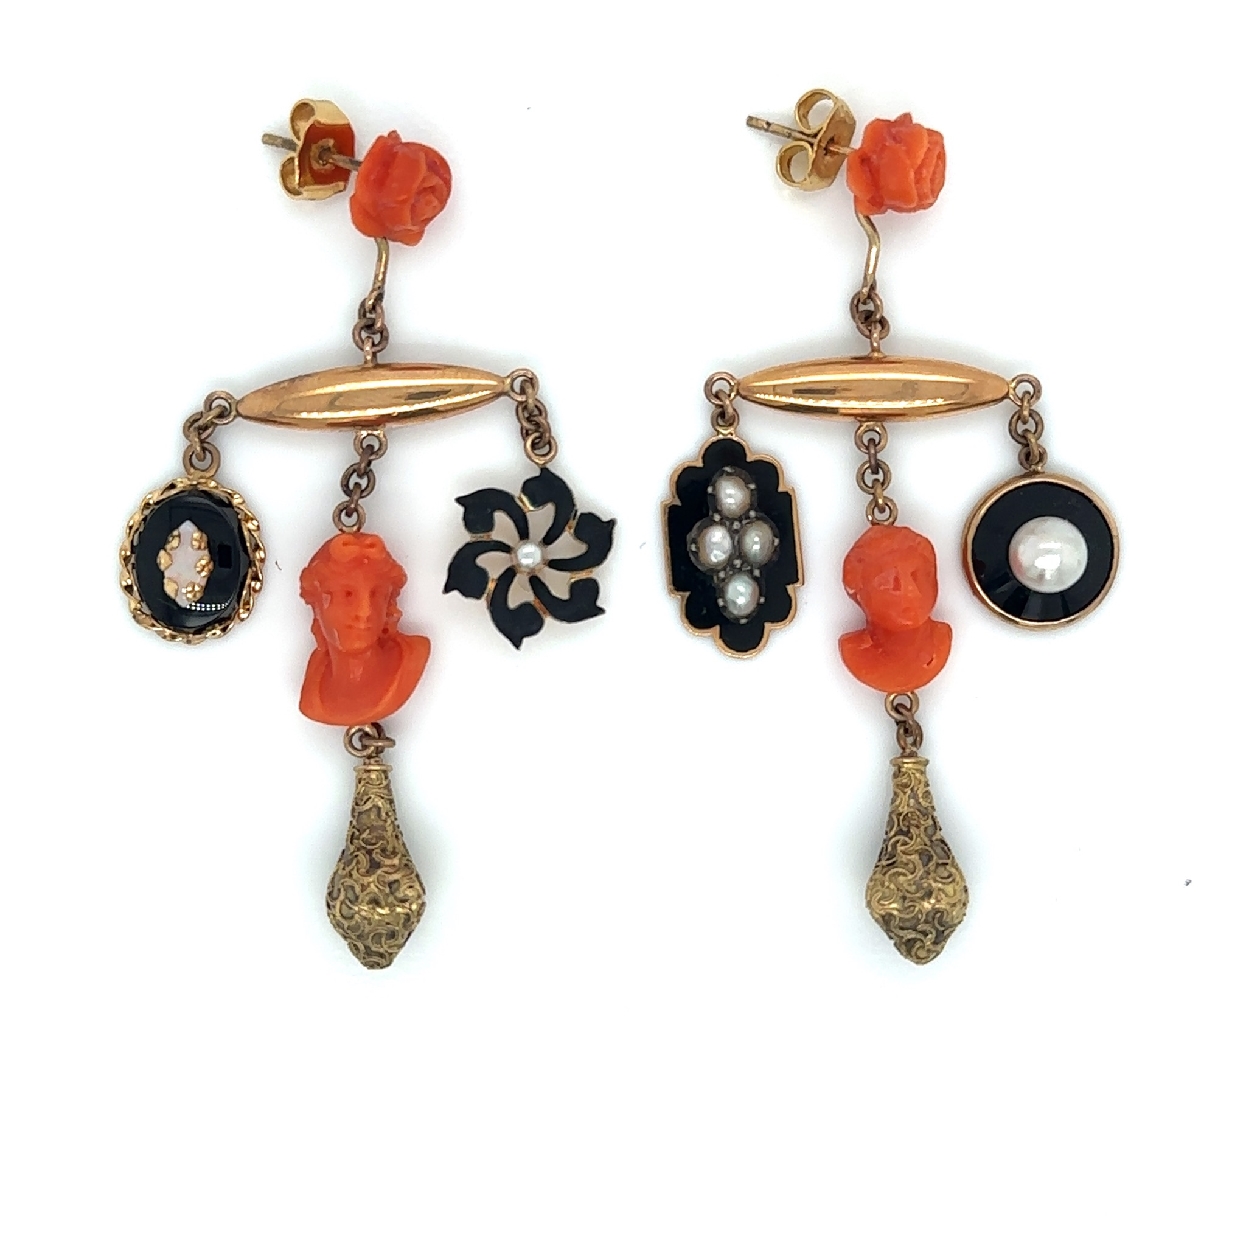 14K Yellow Gold Chandelier Stud Earrings made from Antique Pearl; Onyx; and Coral Repurposed Stick Pins 

3 Inches Long